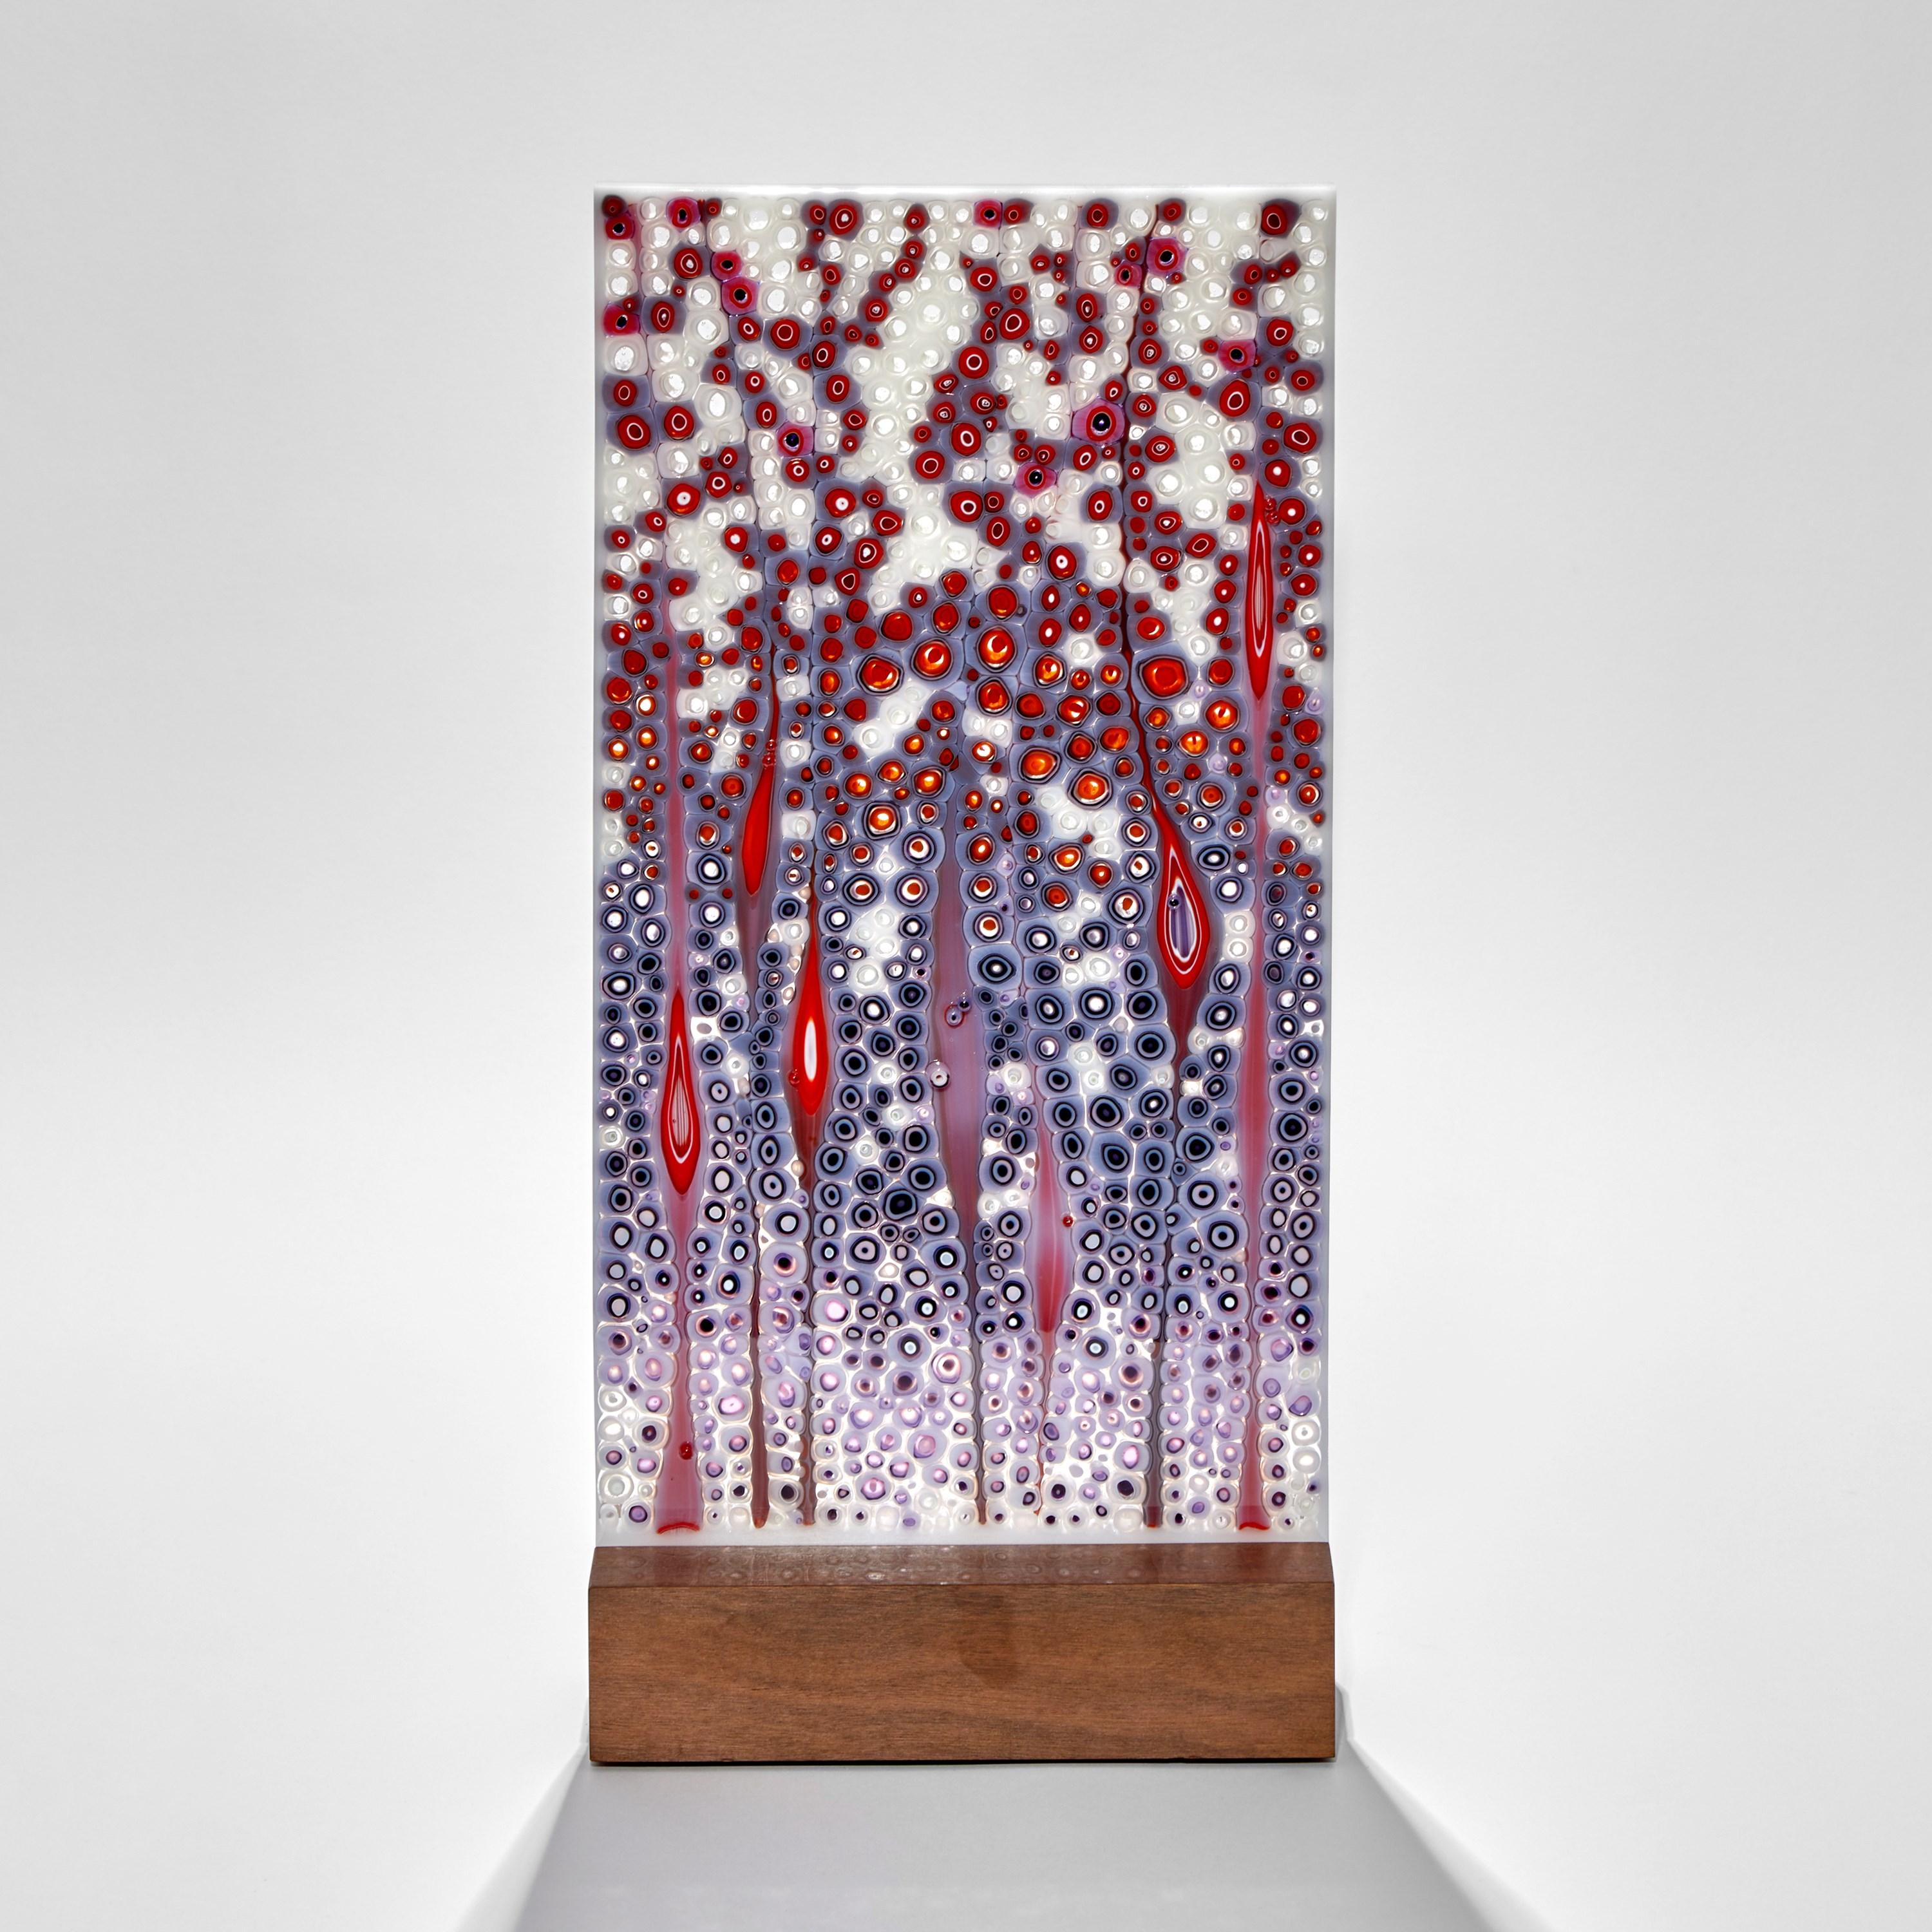 'Orientation in Red & Purple', is a unique purple, red and white glass sculpture by the Austrian artist Sandra A. Fuchs. Fuchs creates her own multicolored and complex glass canes, which are then cut to create small 'murrina'. These she composes to